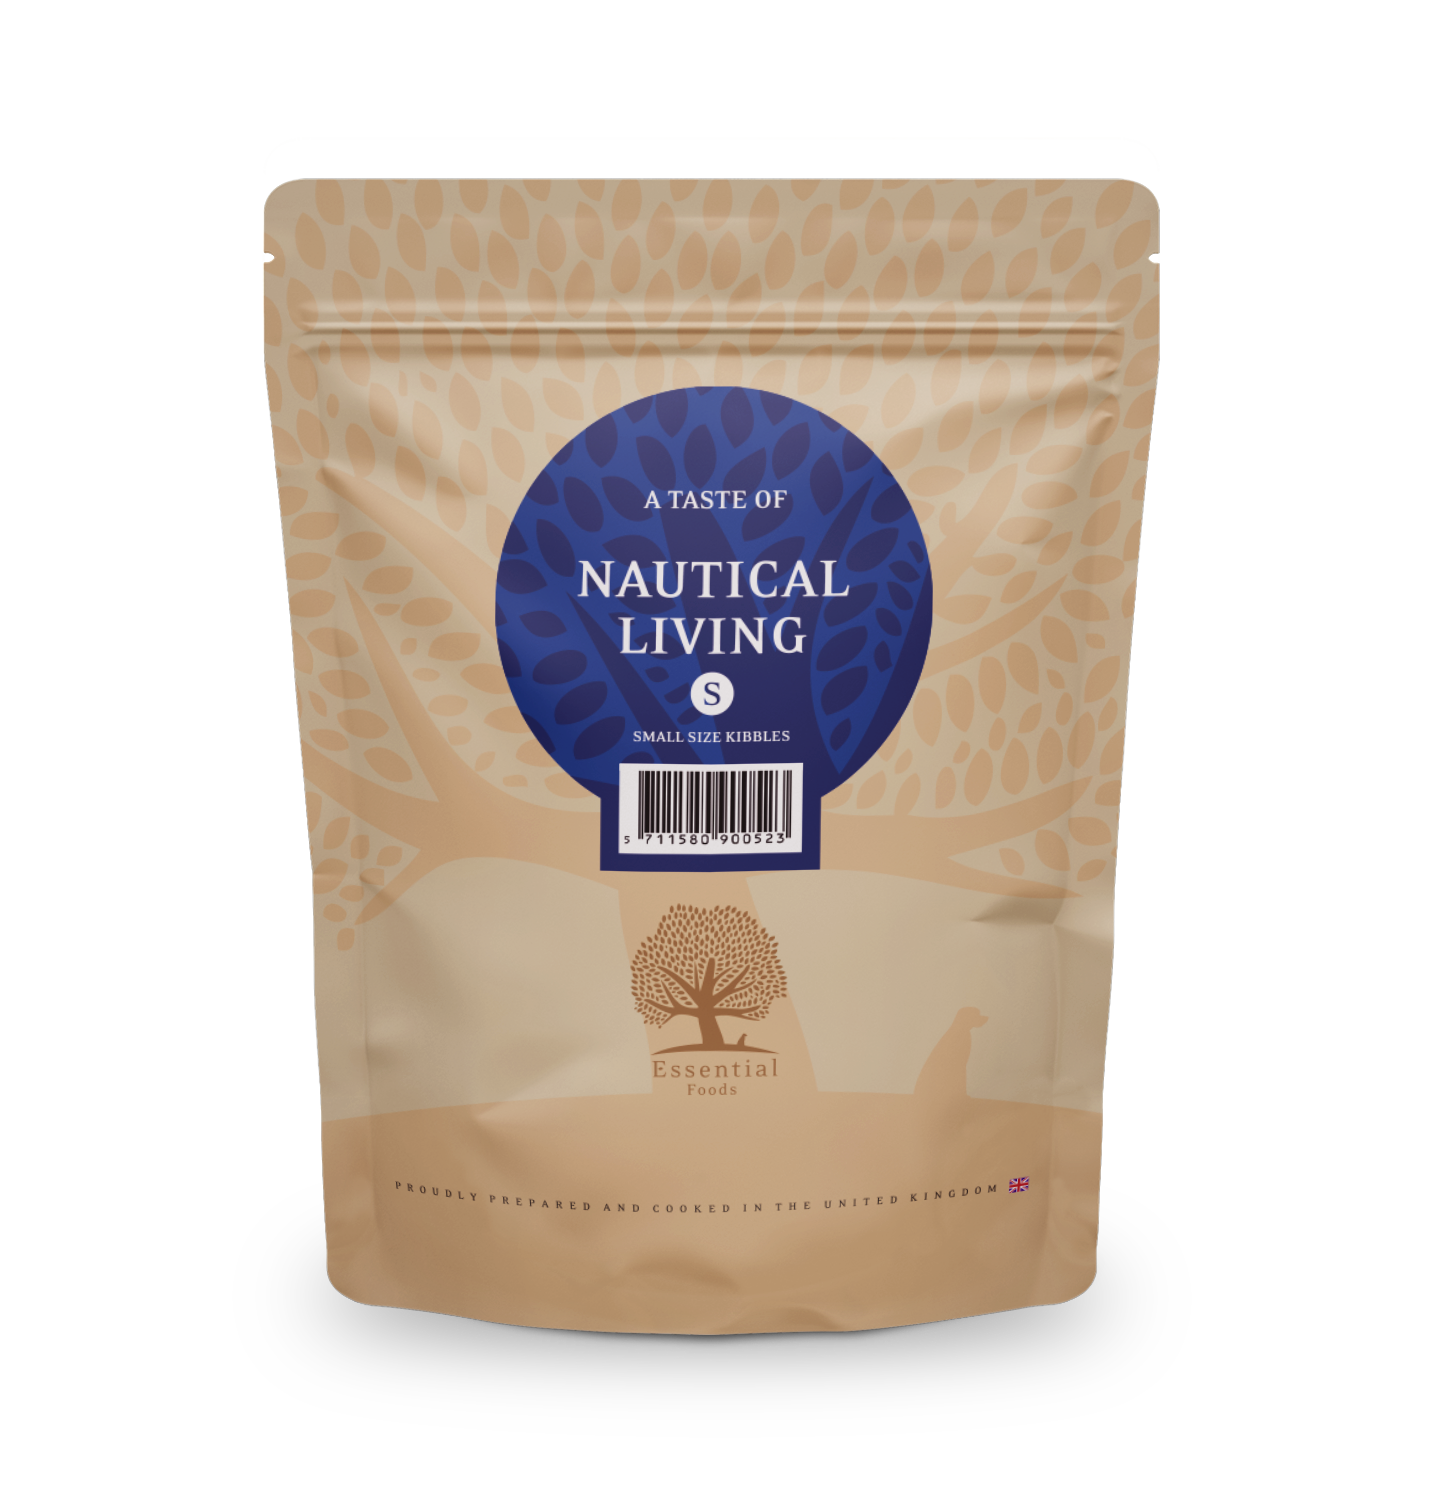 77% Scottish salmon, trout, herring, seasonal fish, eggs Super premium grainless feed for adult dogs of small breeds up to 15kg NAUTICAL LIVING